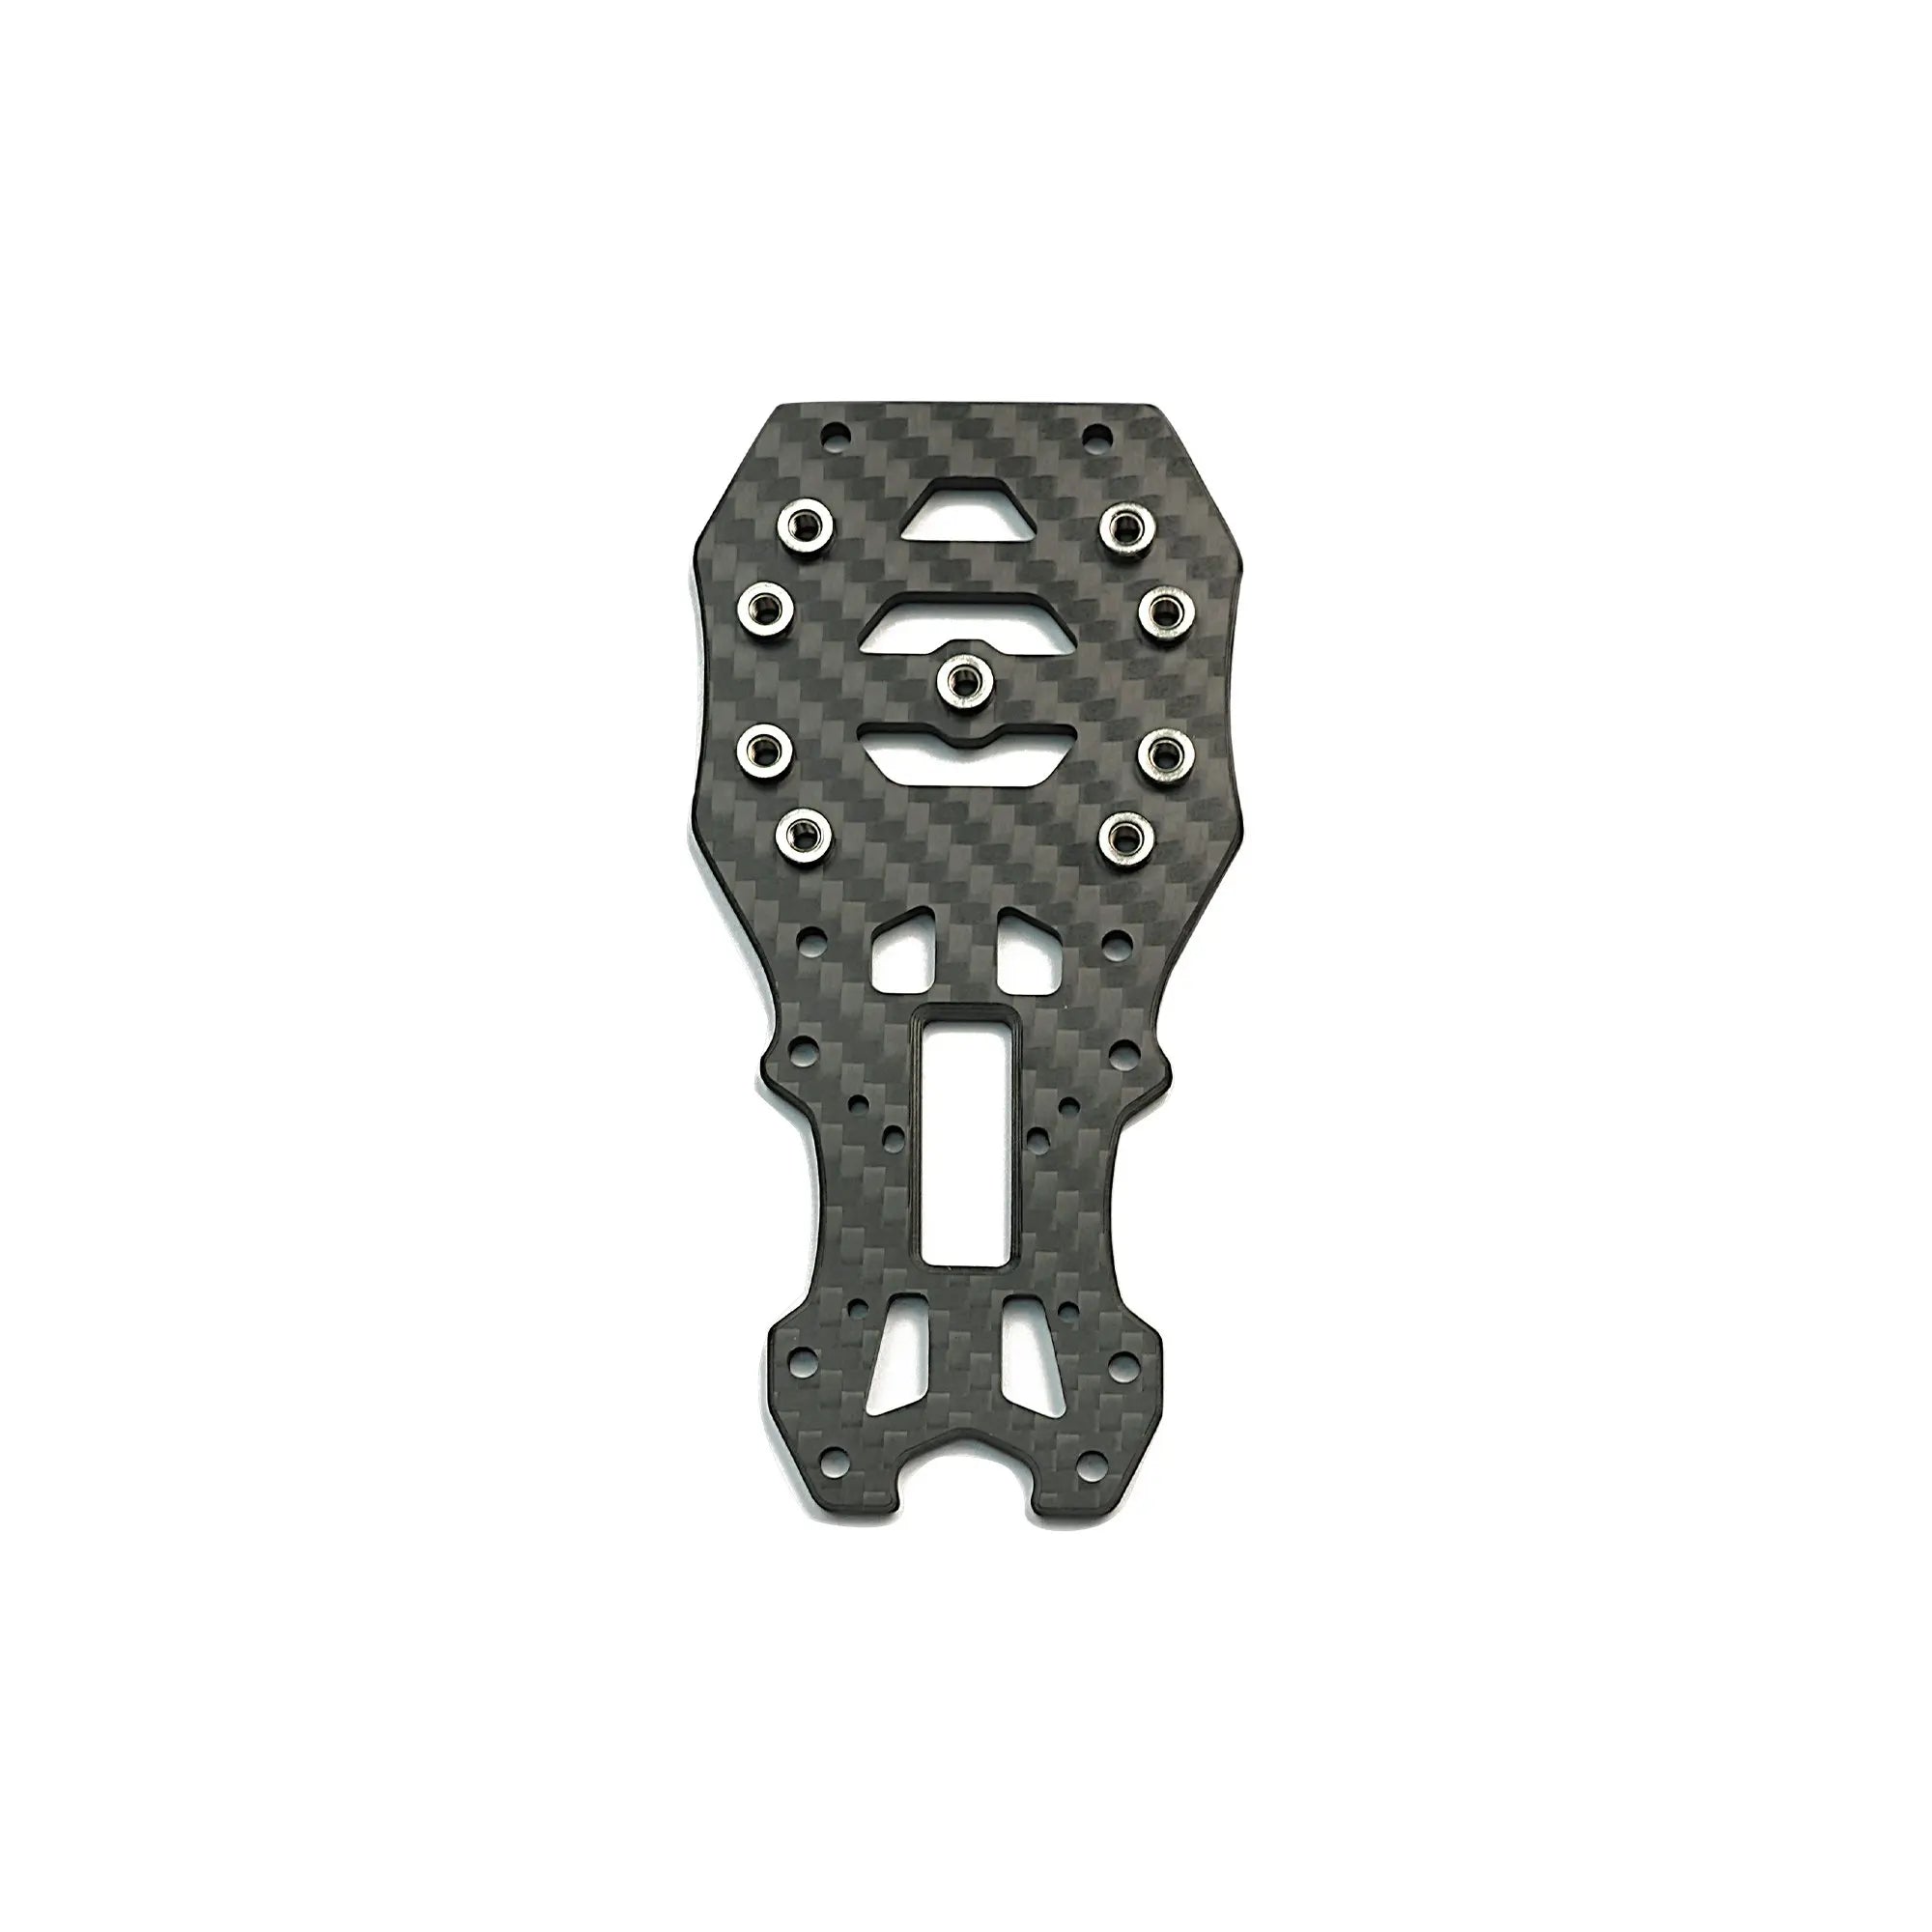 GEPRC GEP-MK5 Frame Parts Material : Composite Material Four-